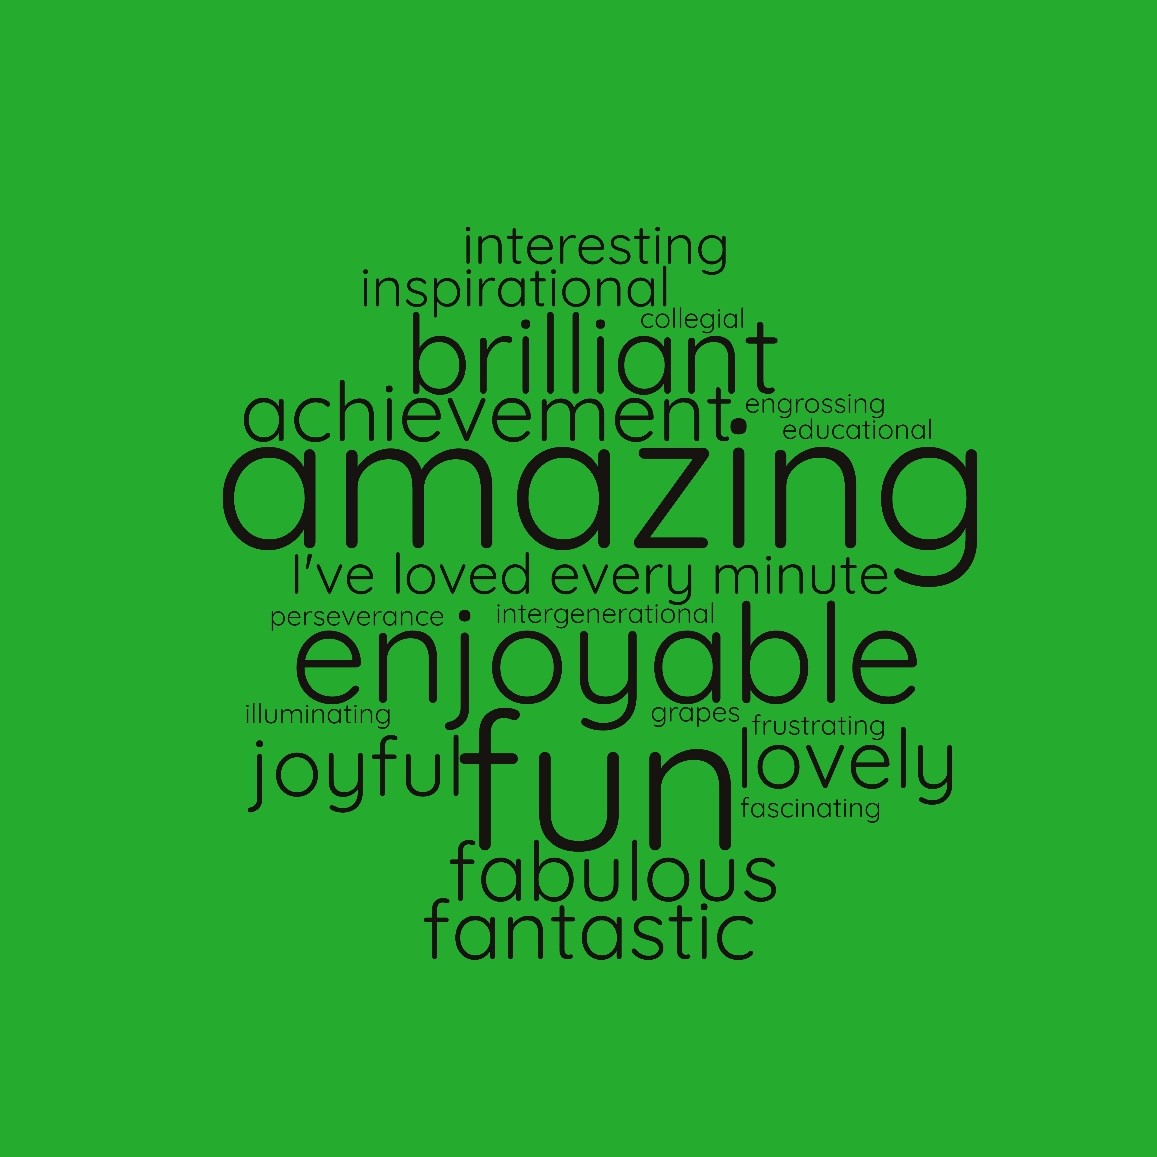 An image of several different words including amazing, enjoyable, fun, brilliant and joyful